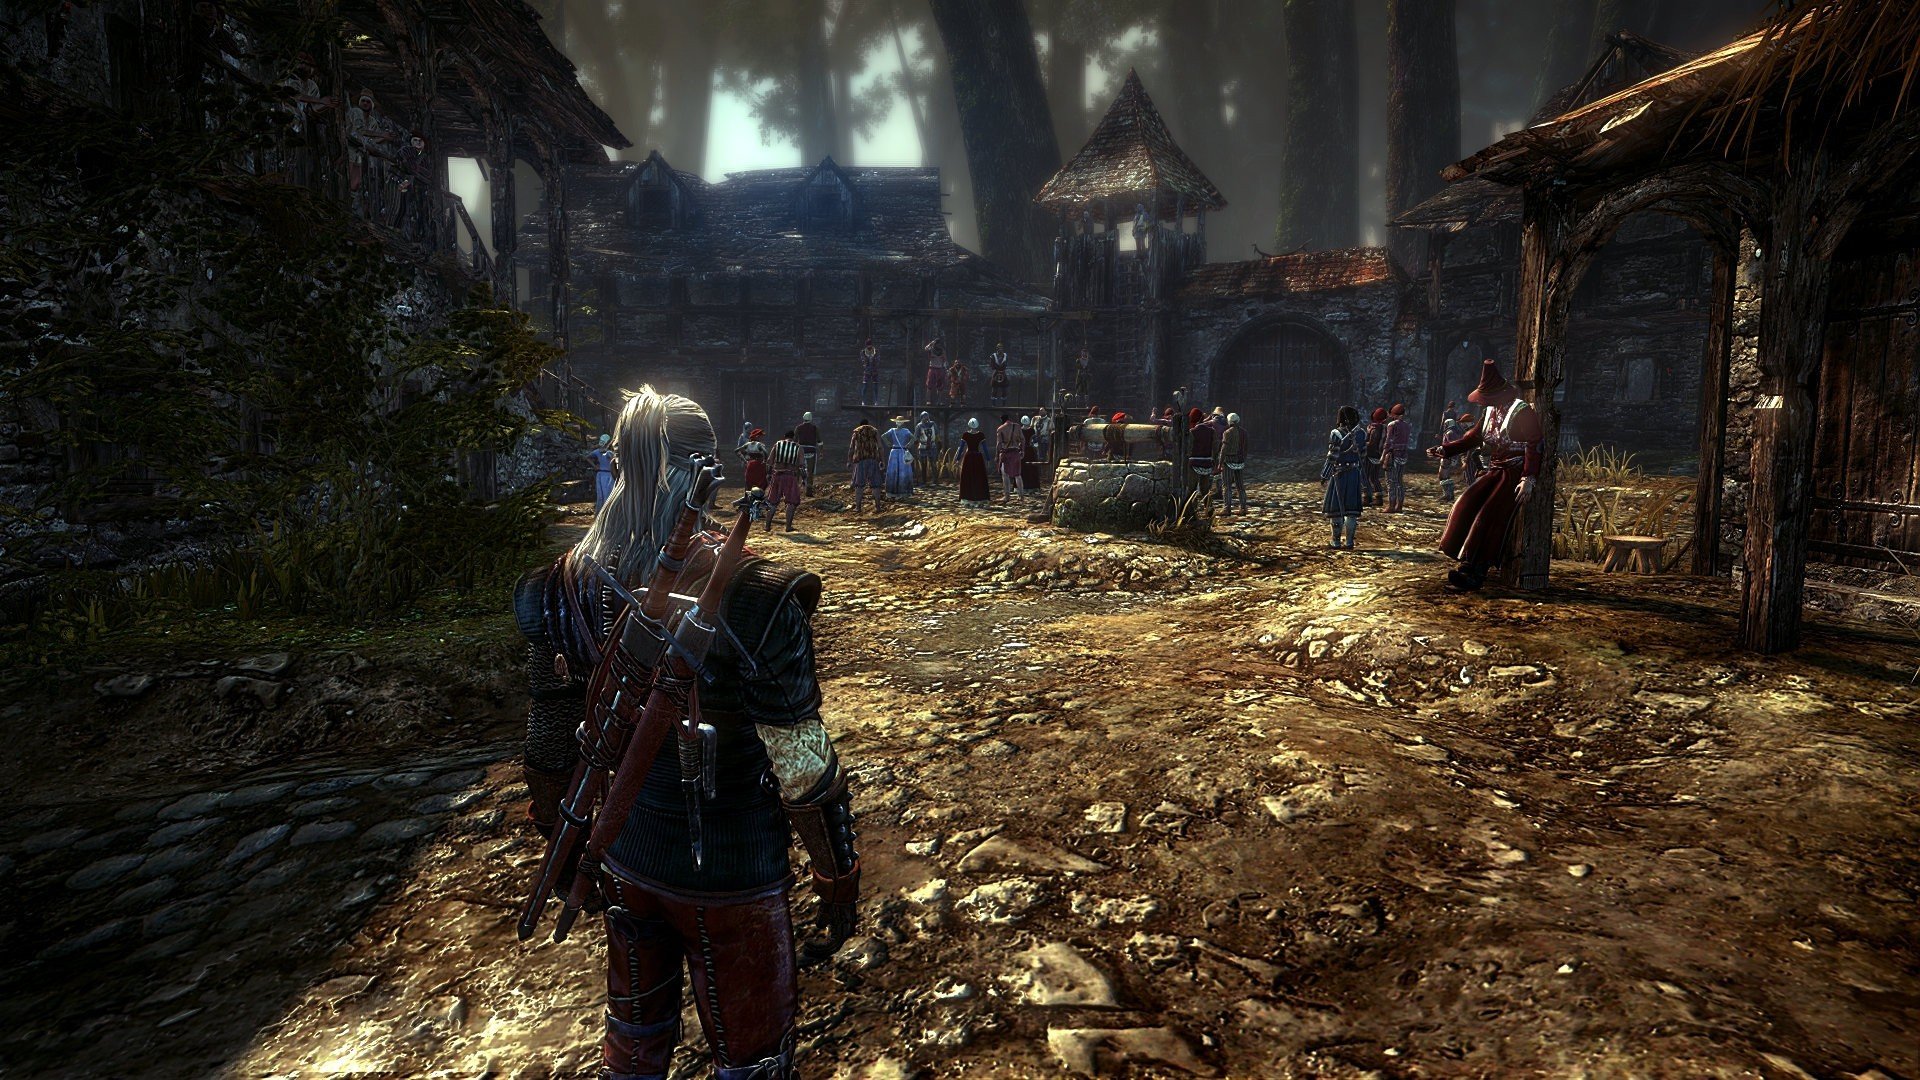 The Witcher 2 Gameplay Movie 2 - Living World 